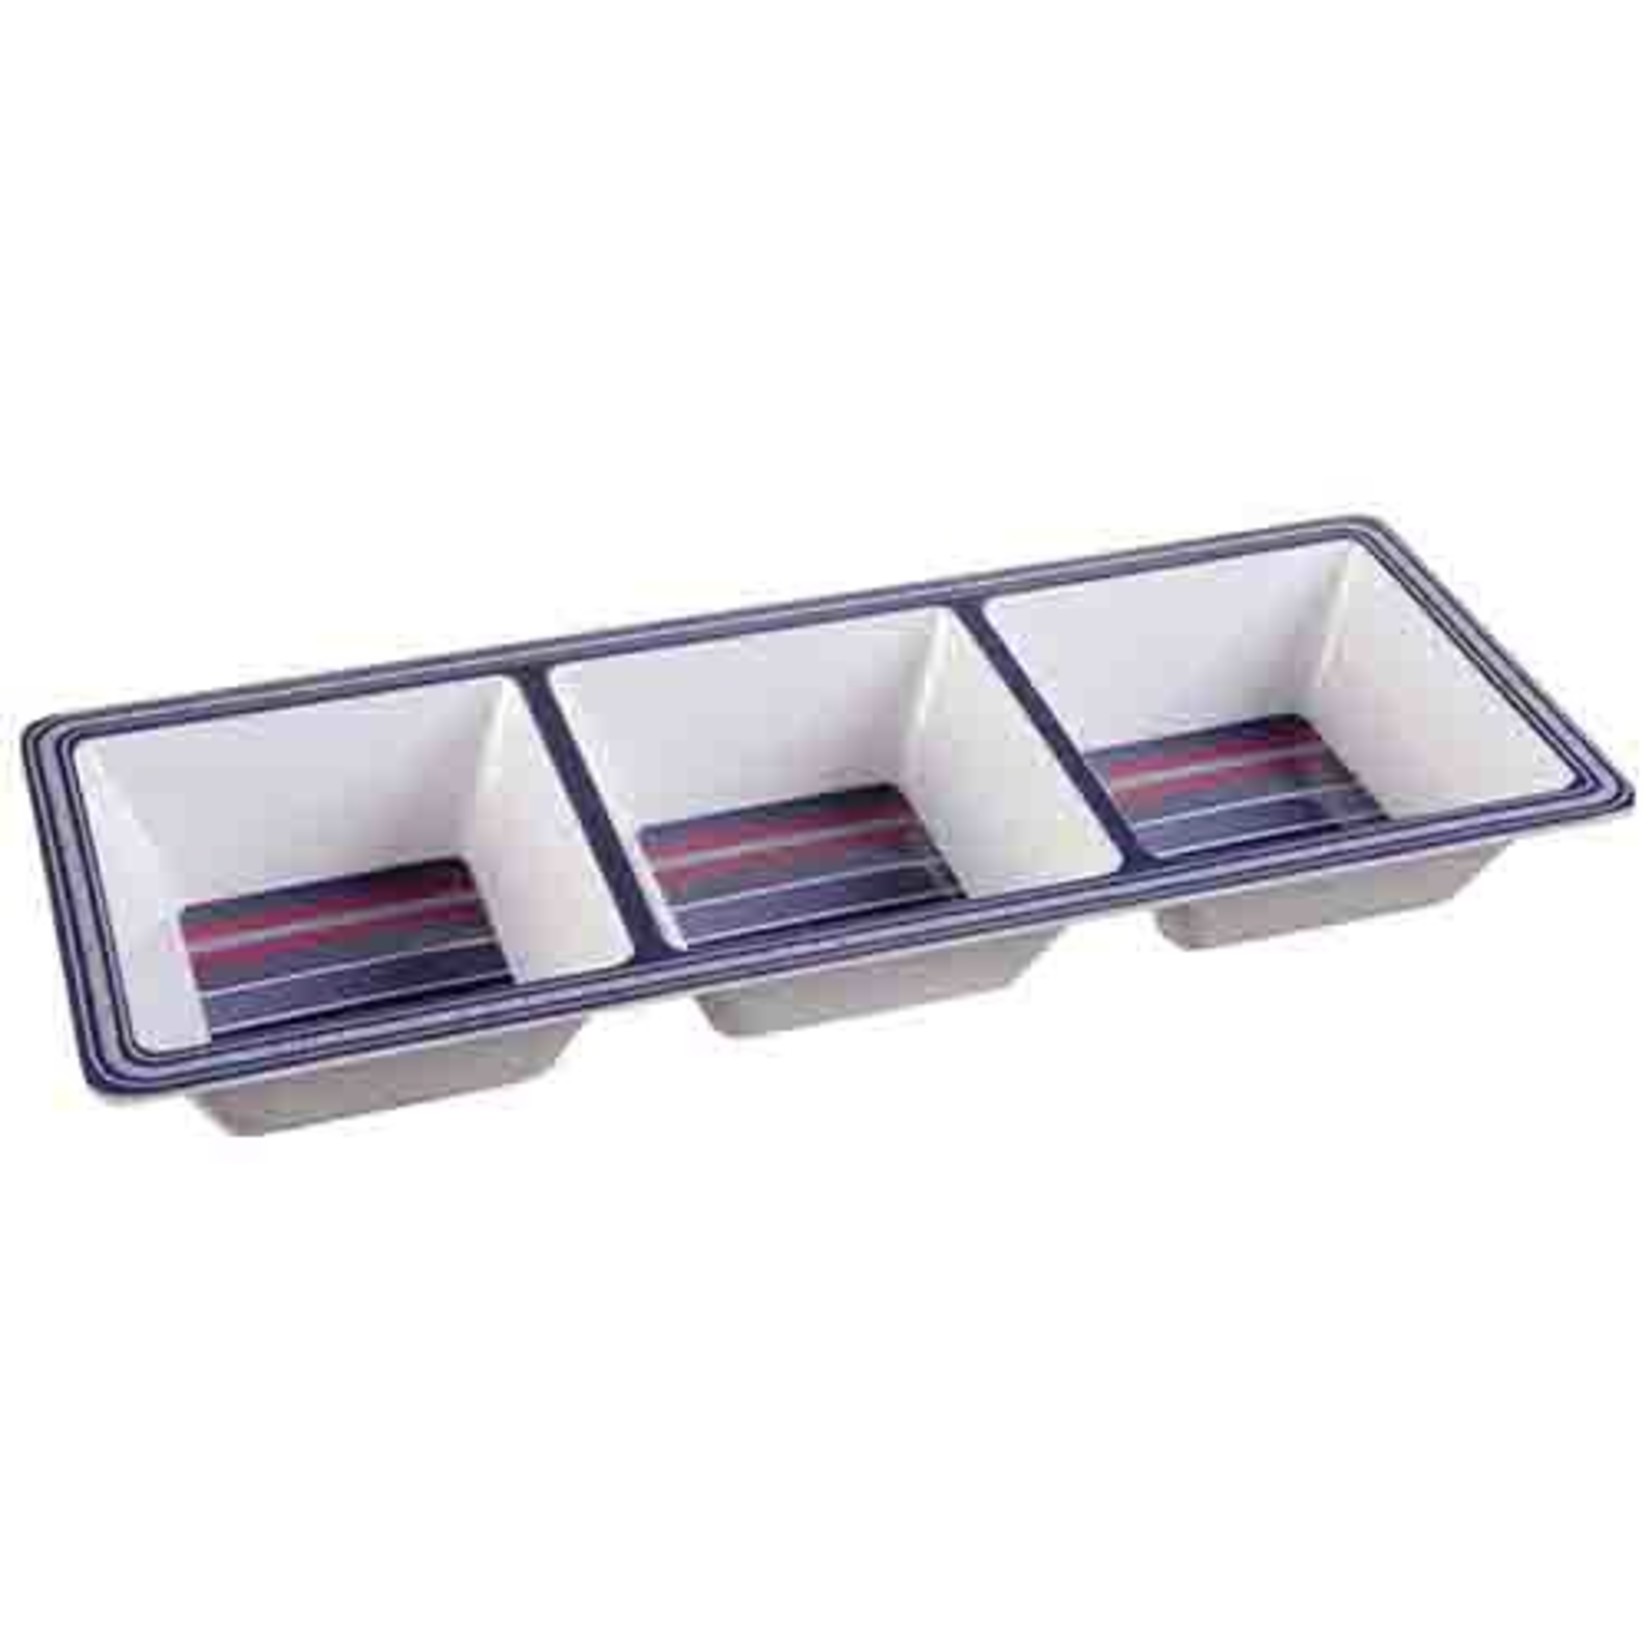 Amscan Patriotic 3 Compartment Chip Dip Tray - 1ct. (6" x 14")